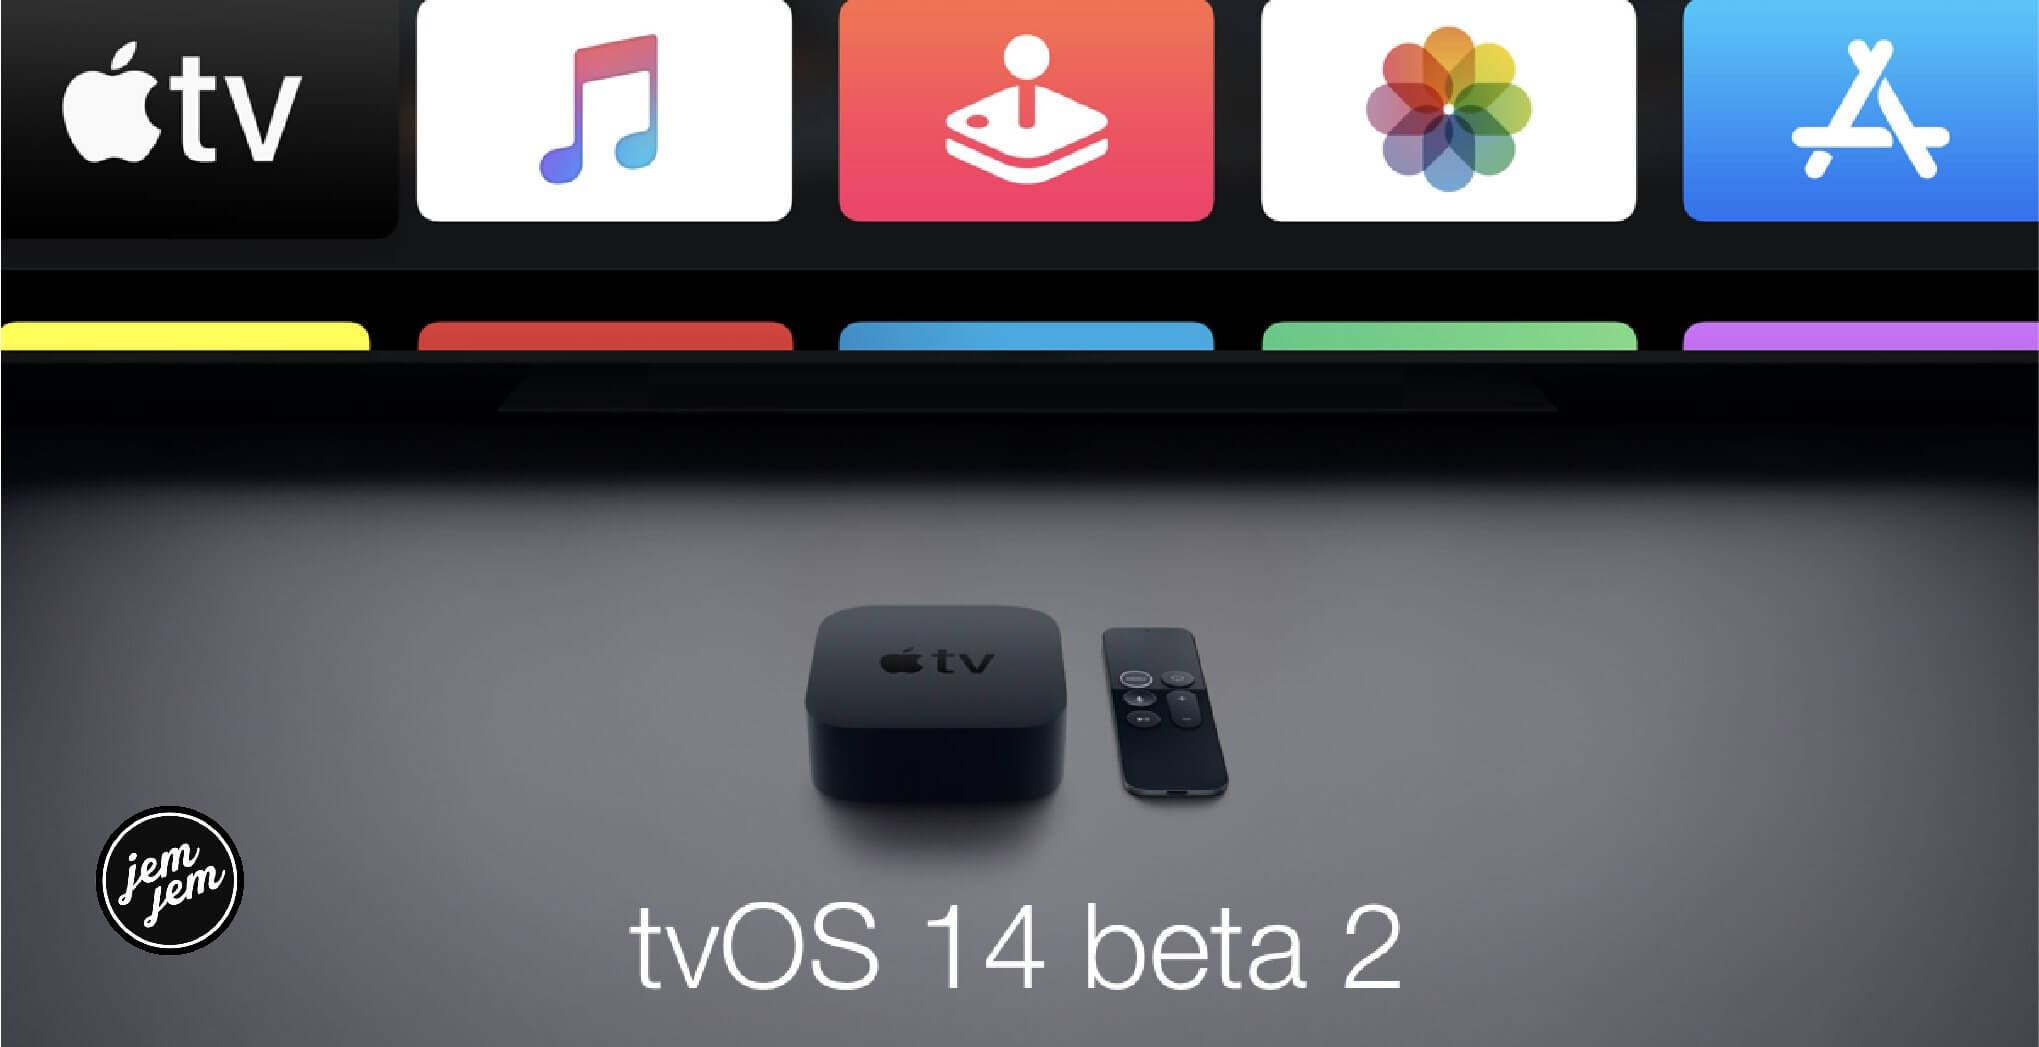 How to download tvOS 14 public beta 2 to your Apple TV